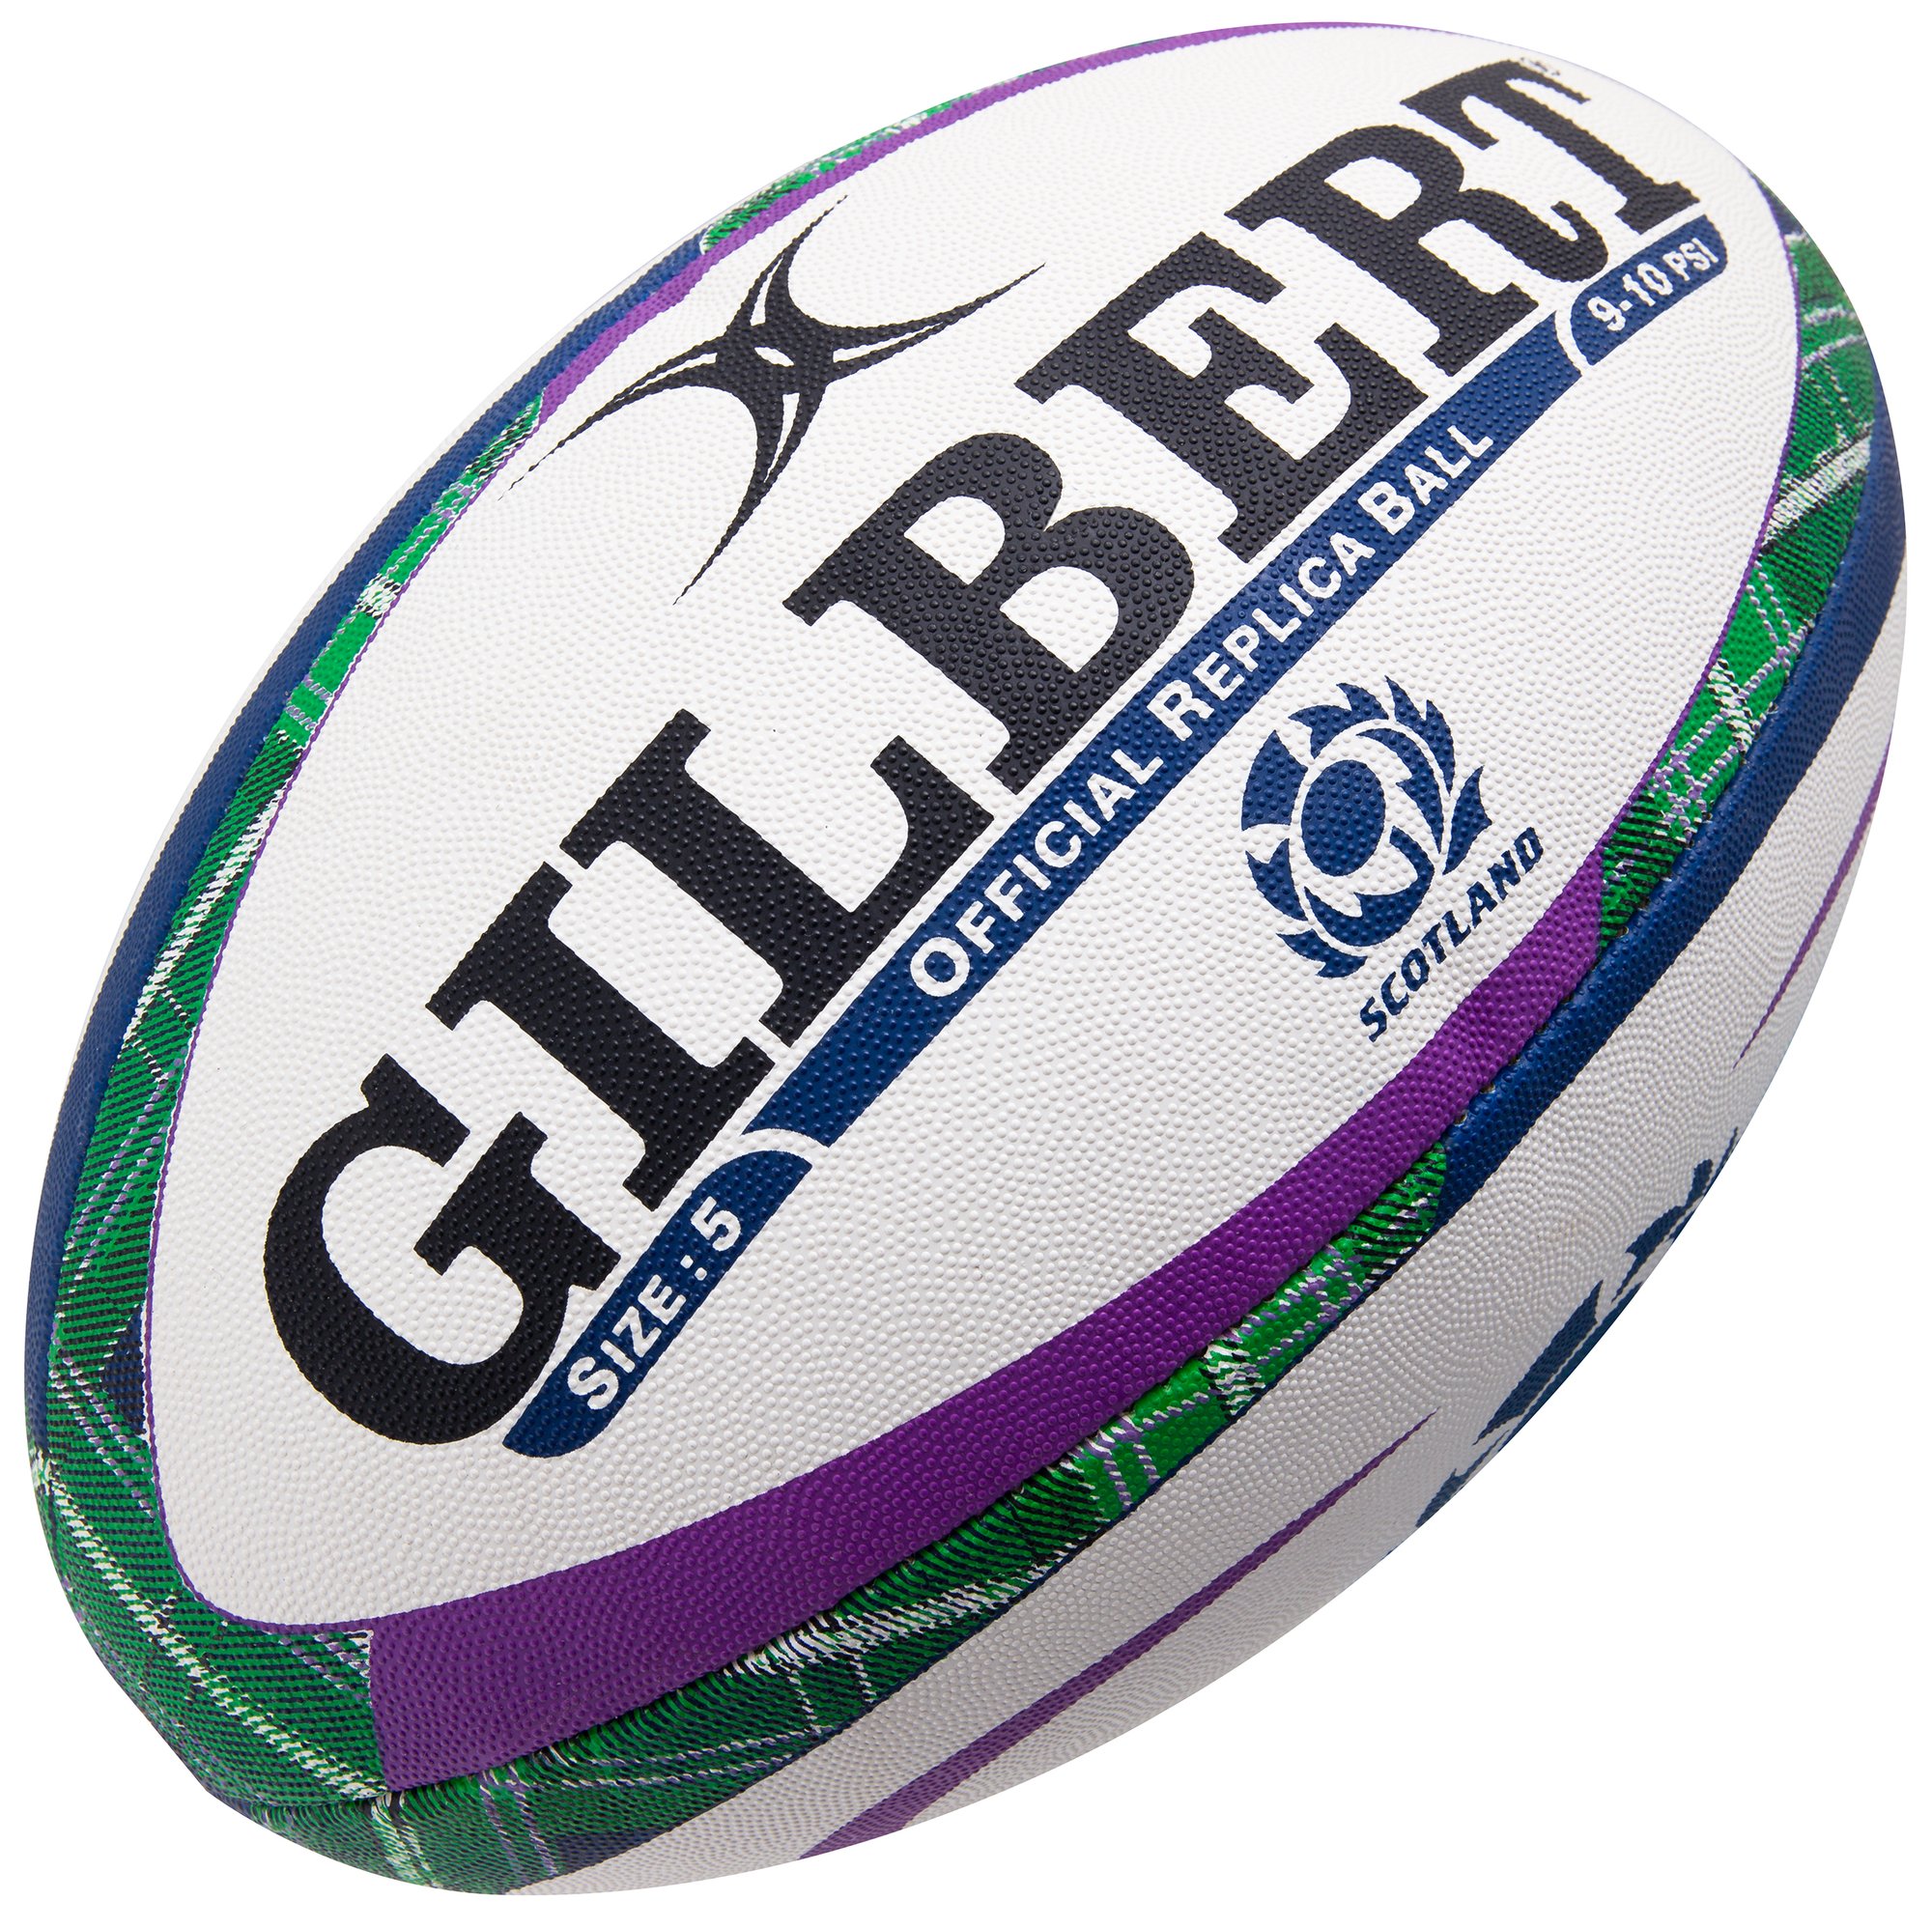 size 5 GILBERT ireland supporter rugby ball white/green 